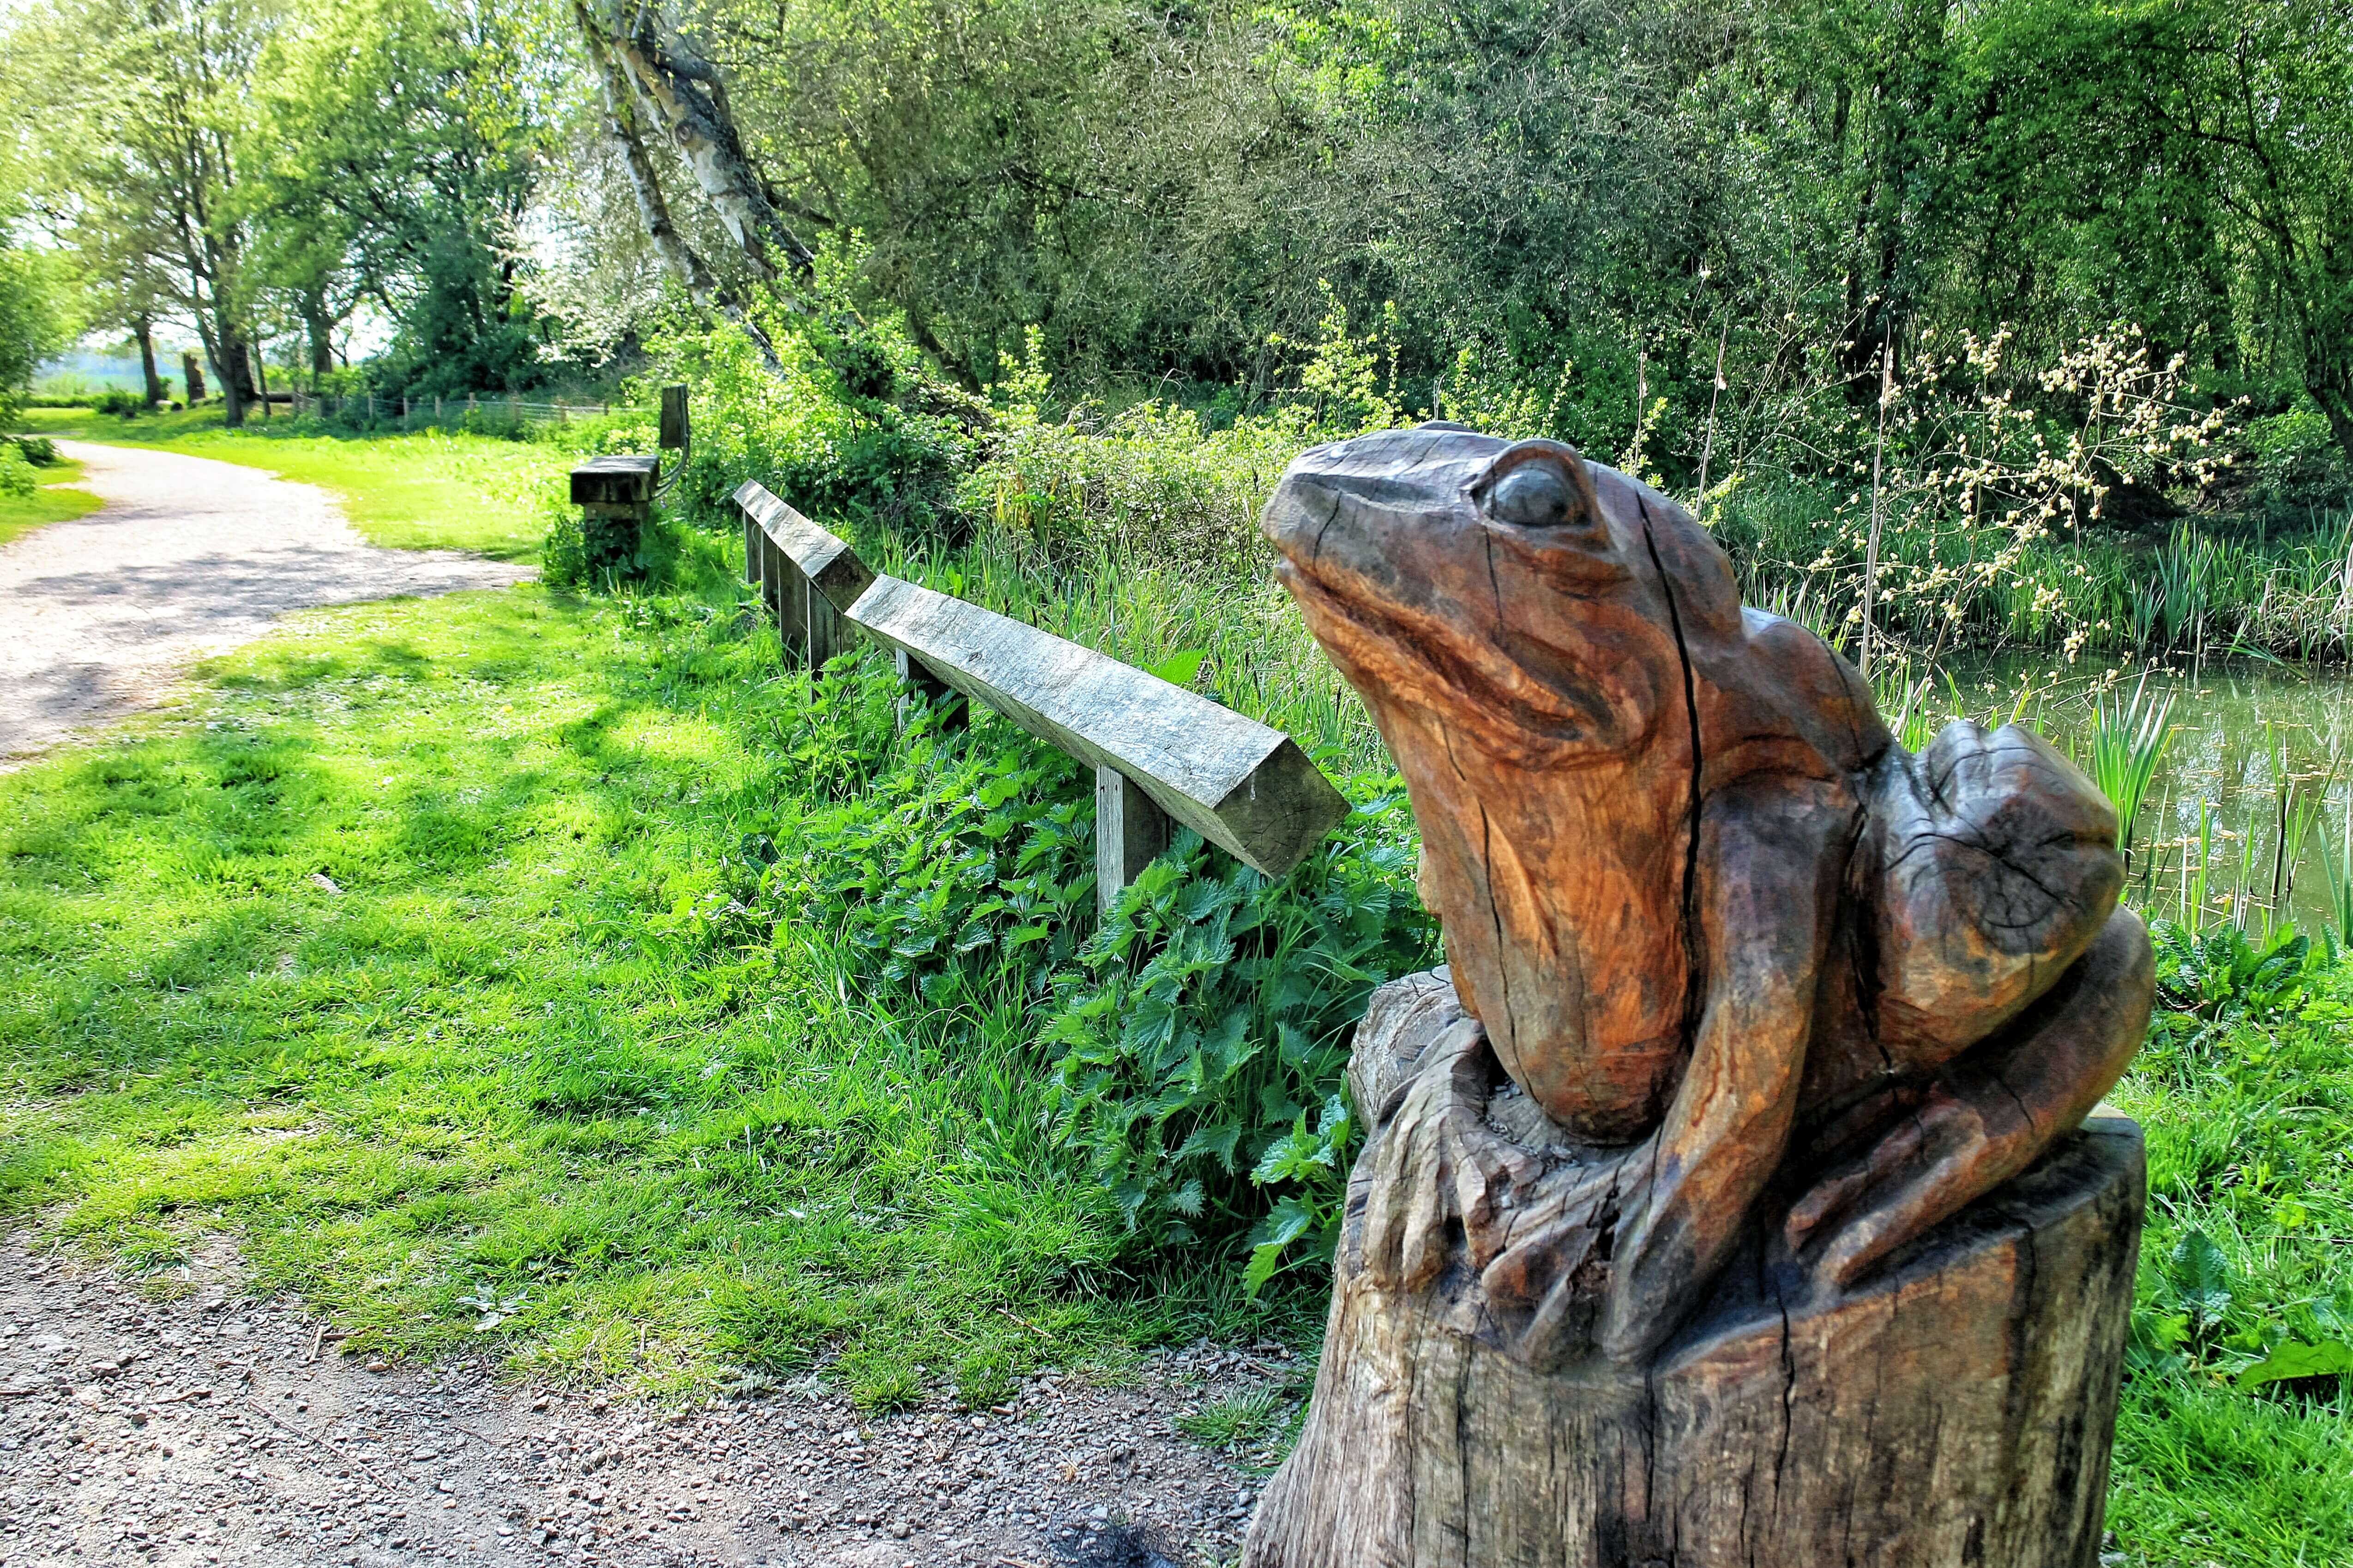 A wooden frog sculpture sits by a path